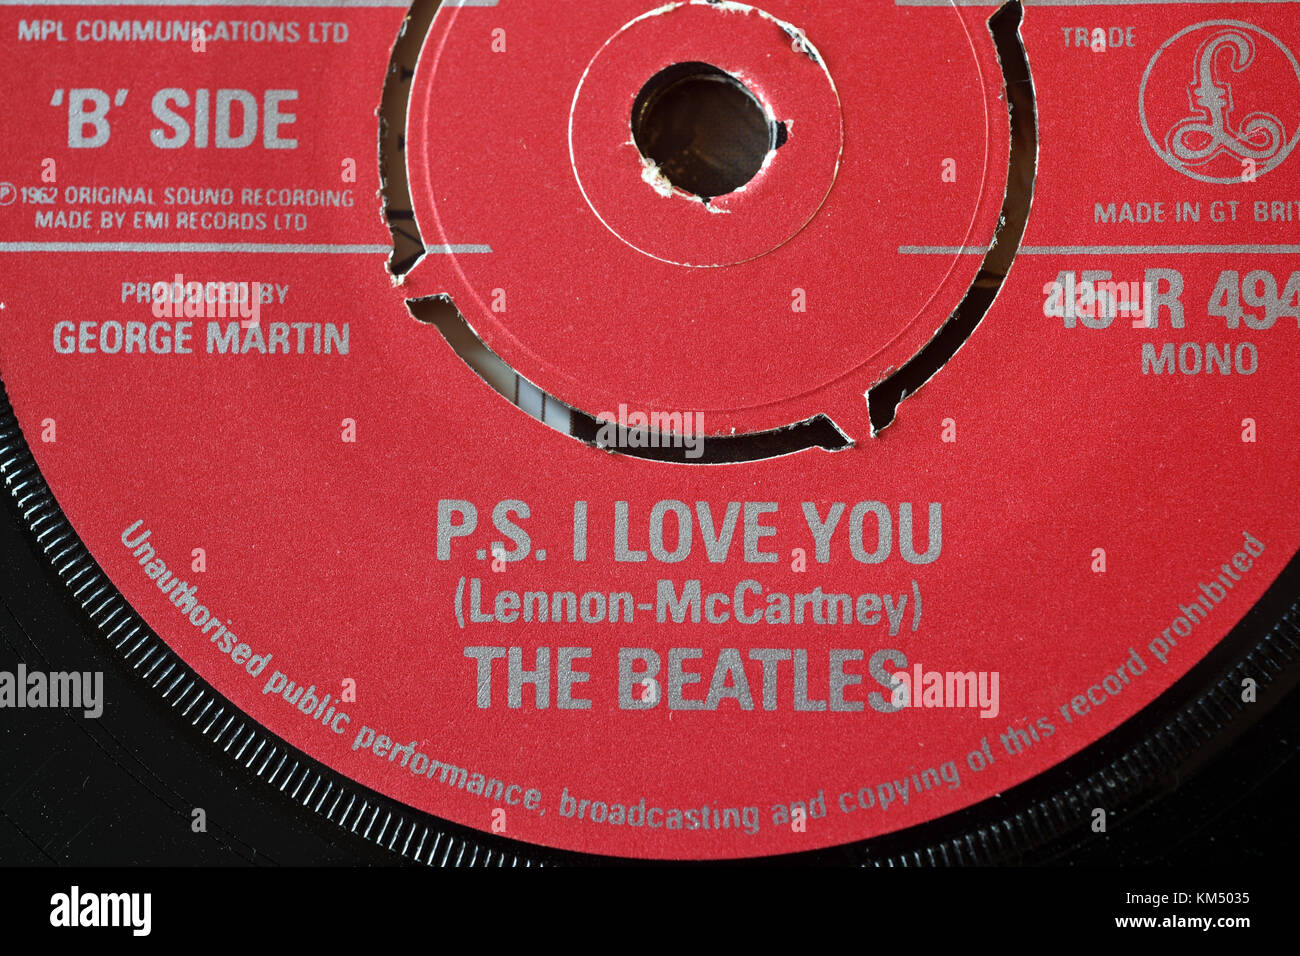 PS I Love You single by The Beatles on the red Parlophone label Stock Photo